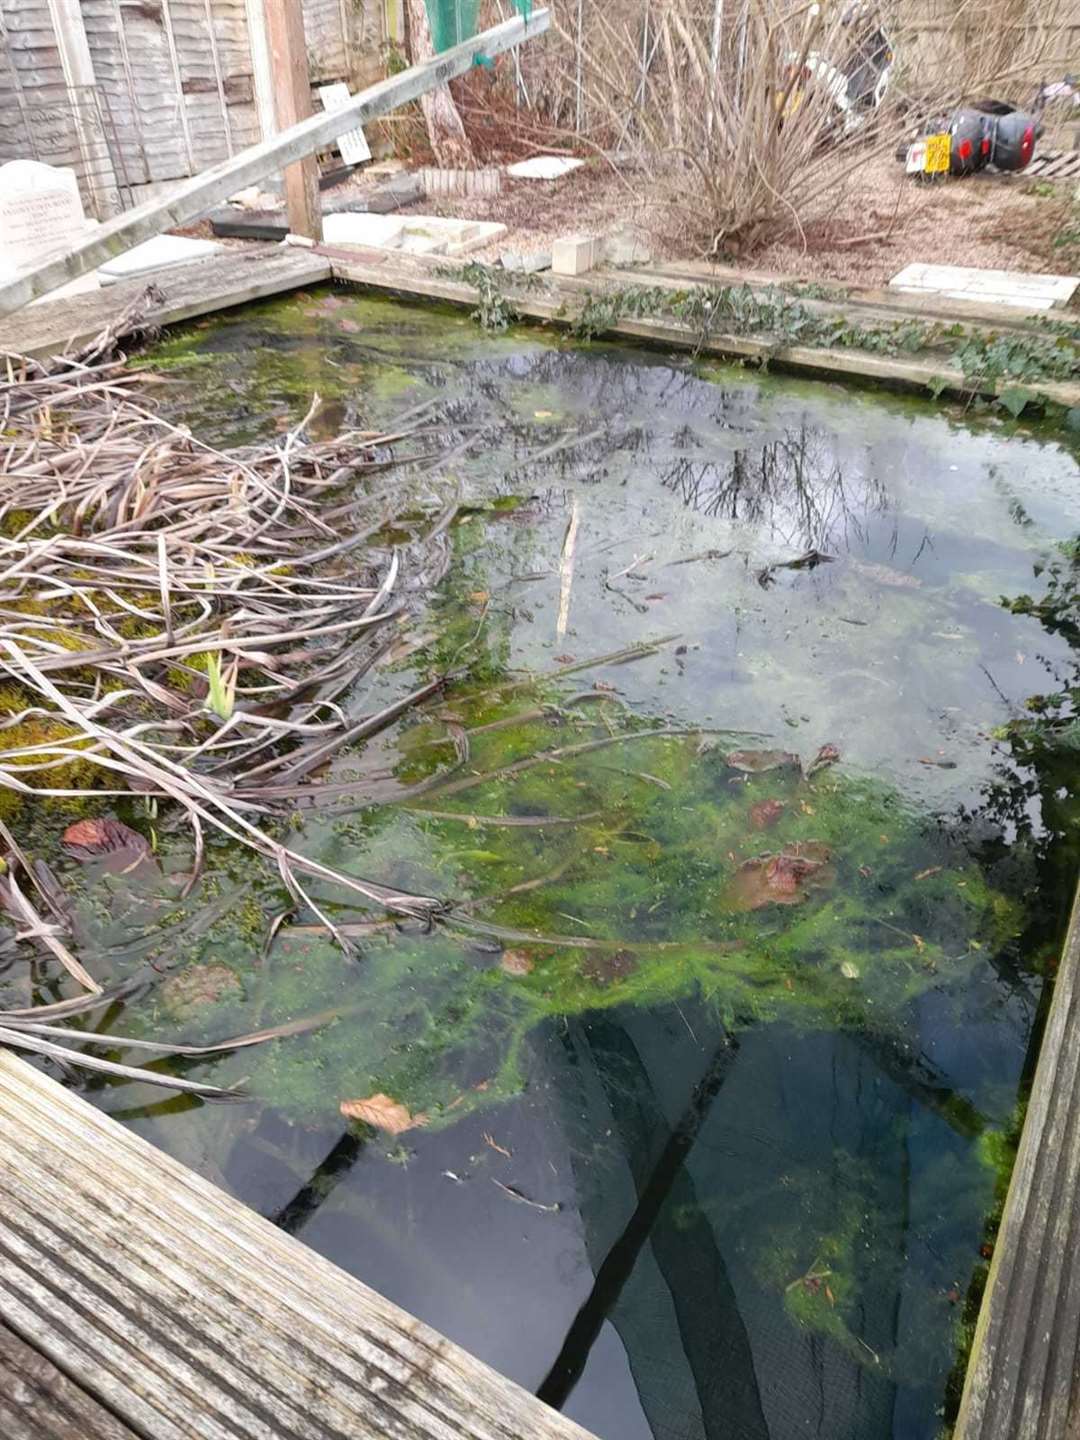 The pond at The Bull Inn pub in East Farleigh, which is subject to an animal welfare investigation (60904898)